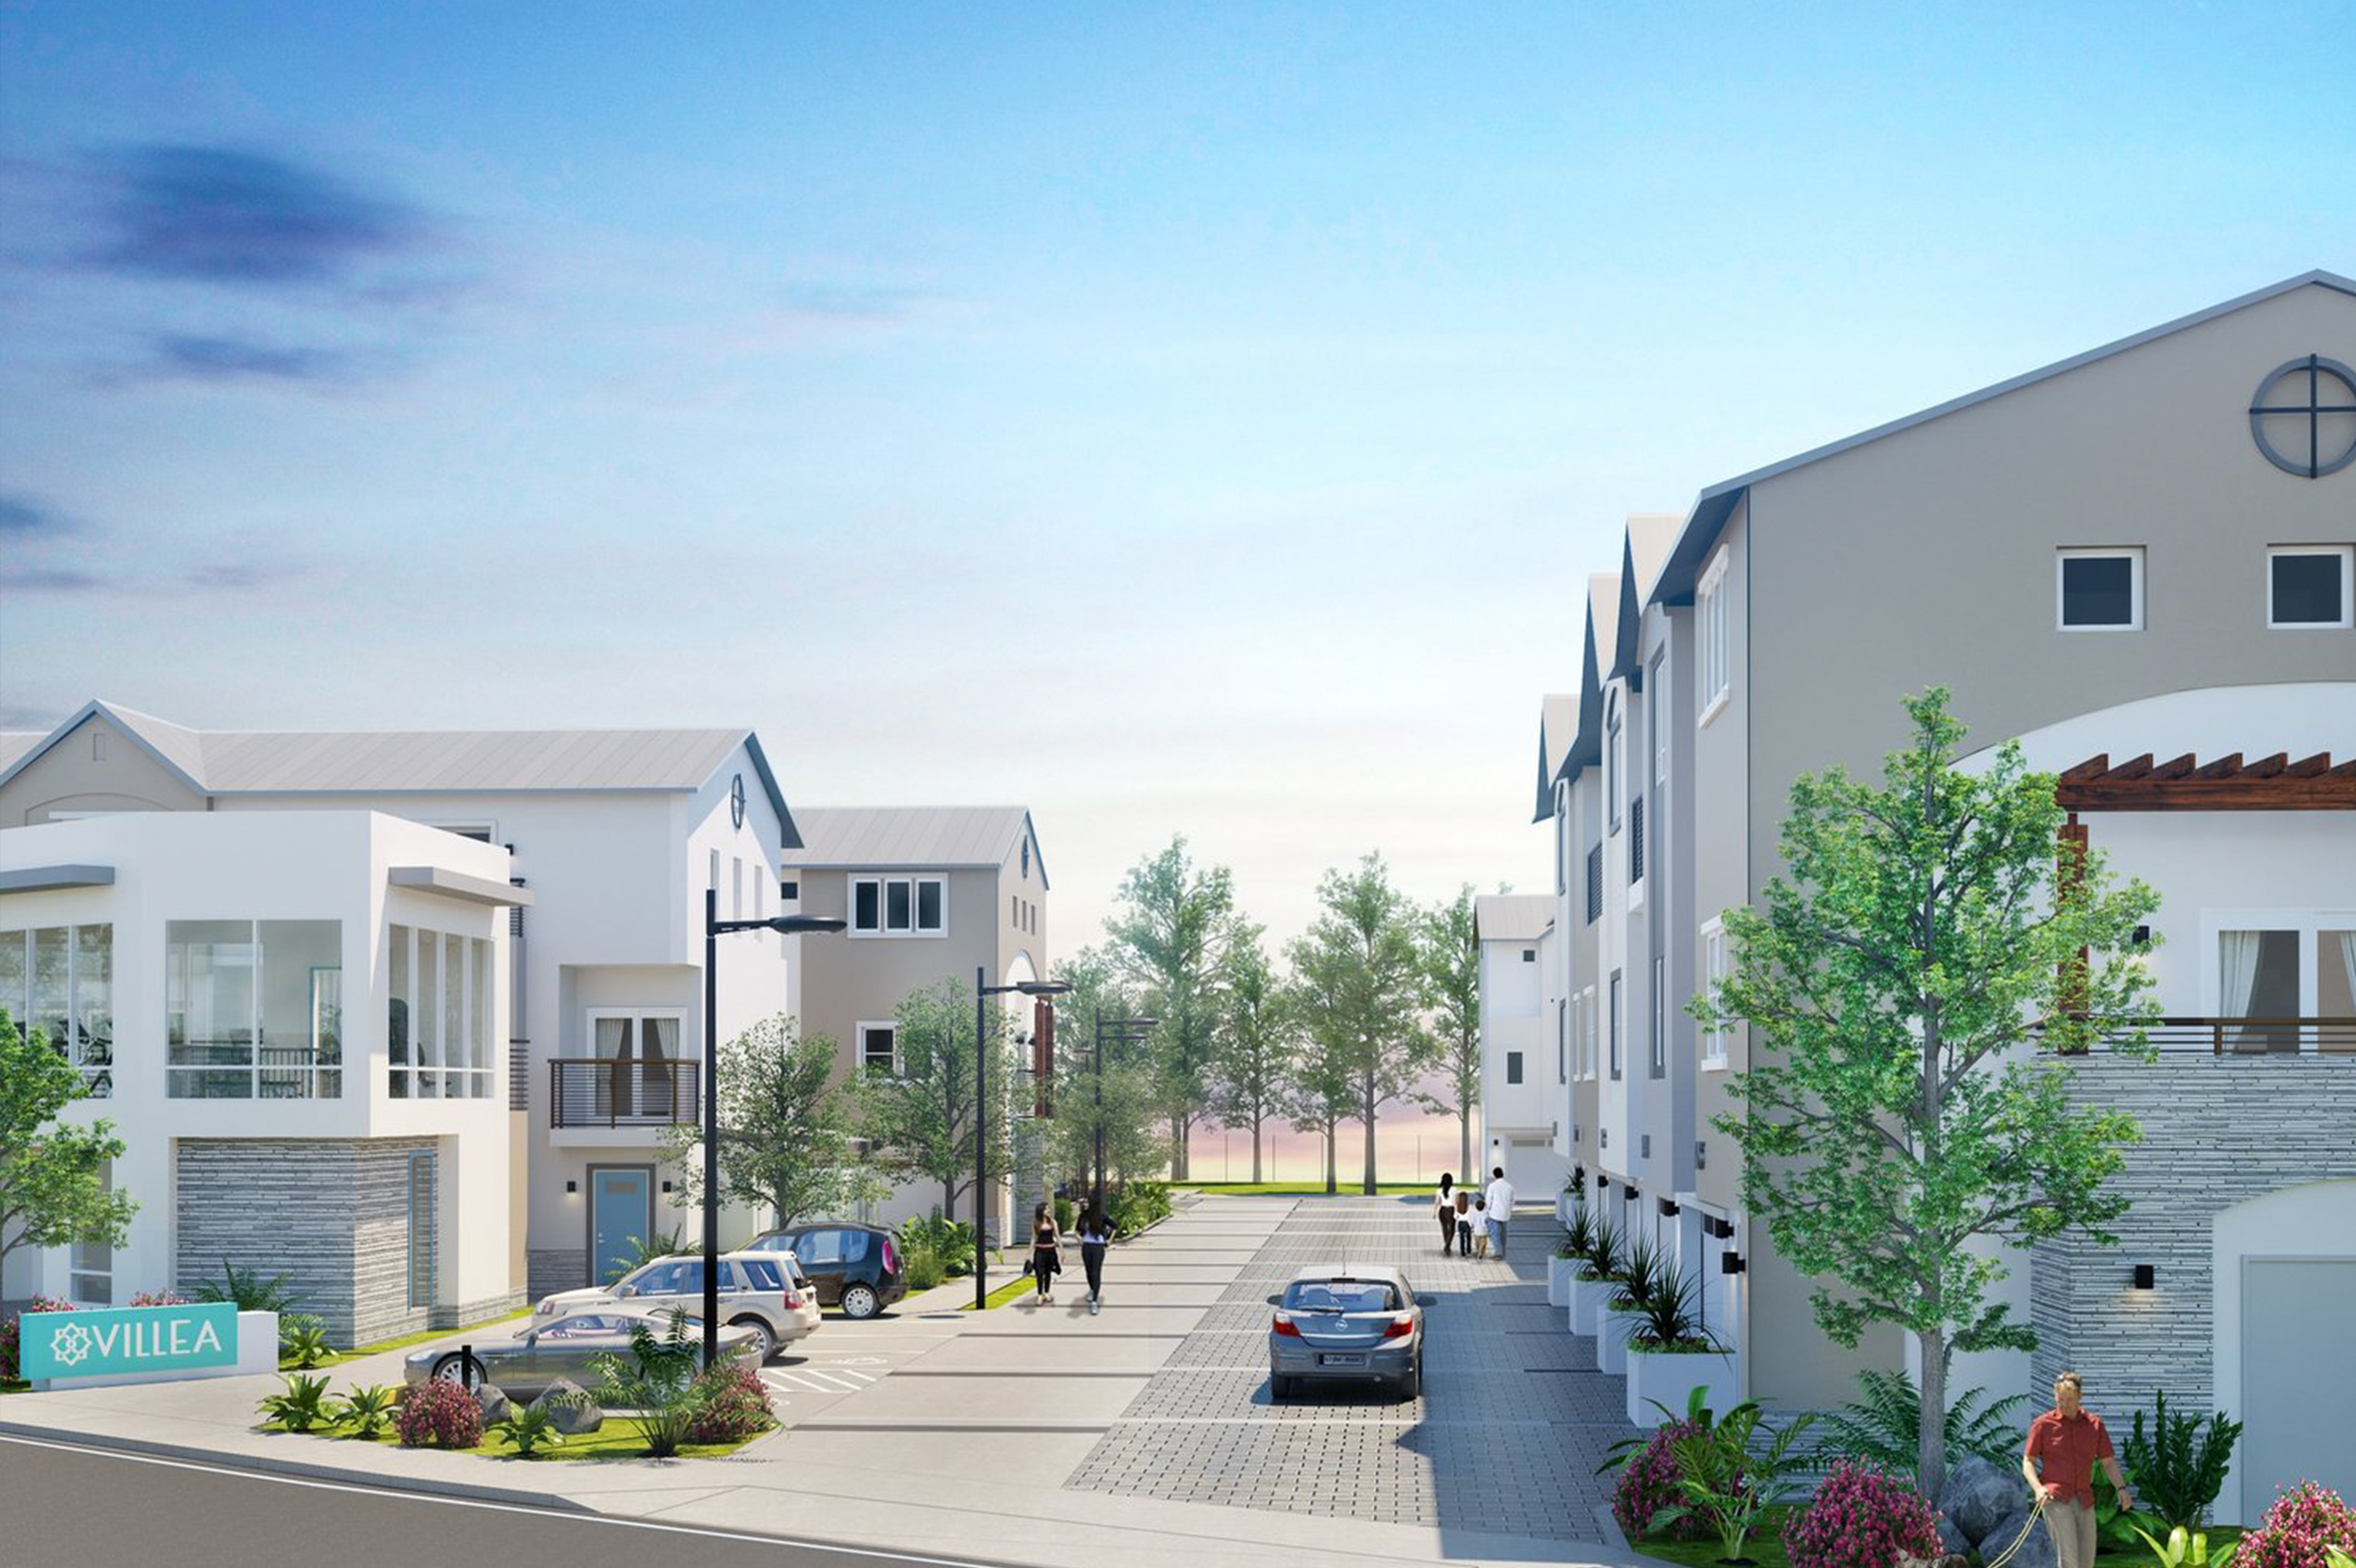 SENTRE Commences Construction on New Multi-Family Property, Villea at Lake Murray